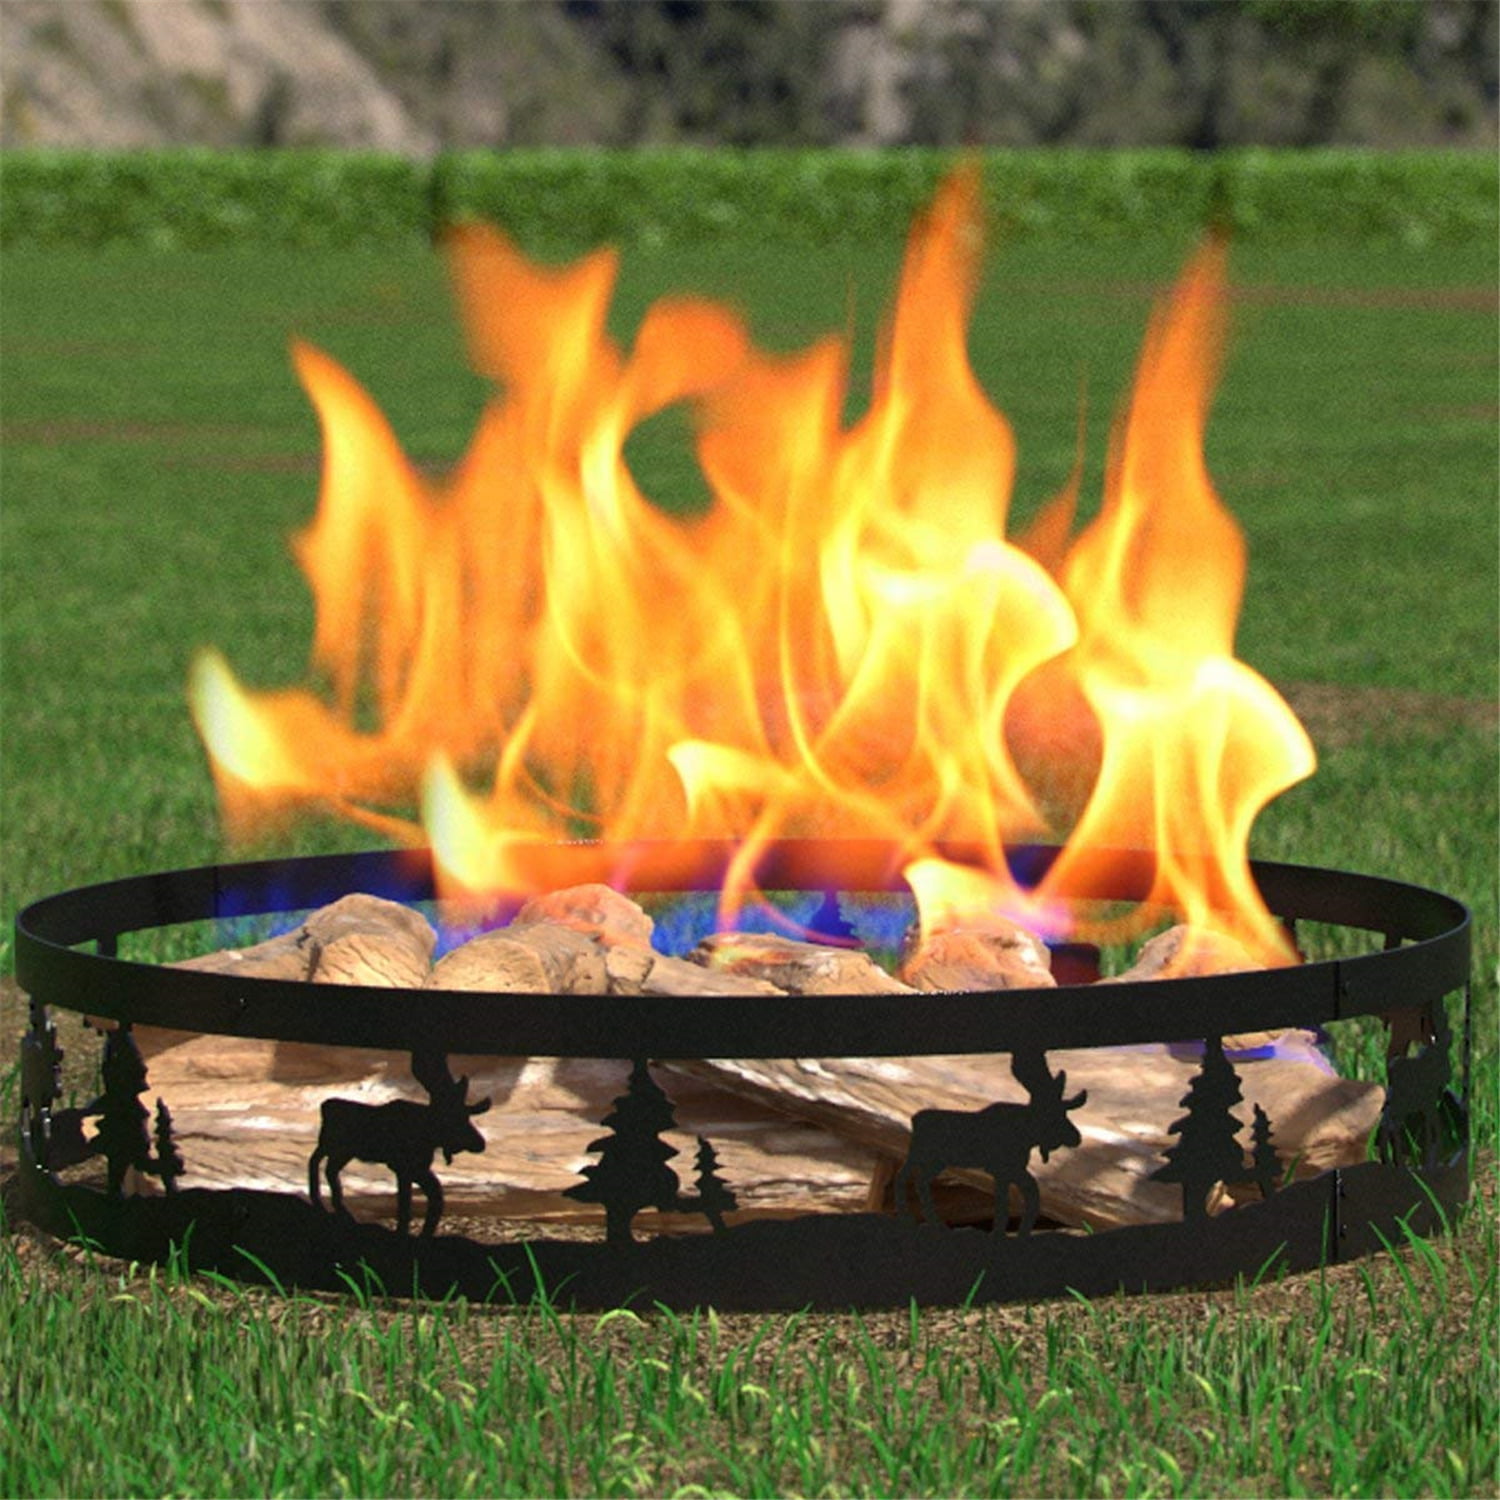 Regal Flame Boston Backyard Garden Home Deer and Trees Light Wood Fire Pit Fire Ring. For RV, Camping, and Outdoor Fireplace. Wo